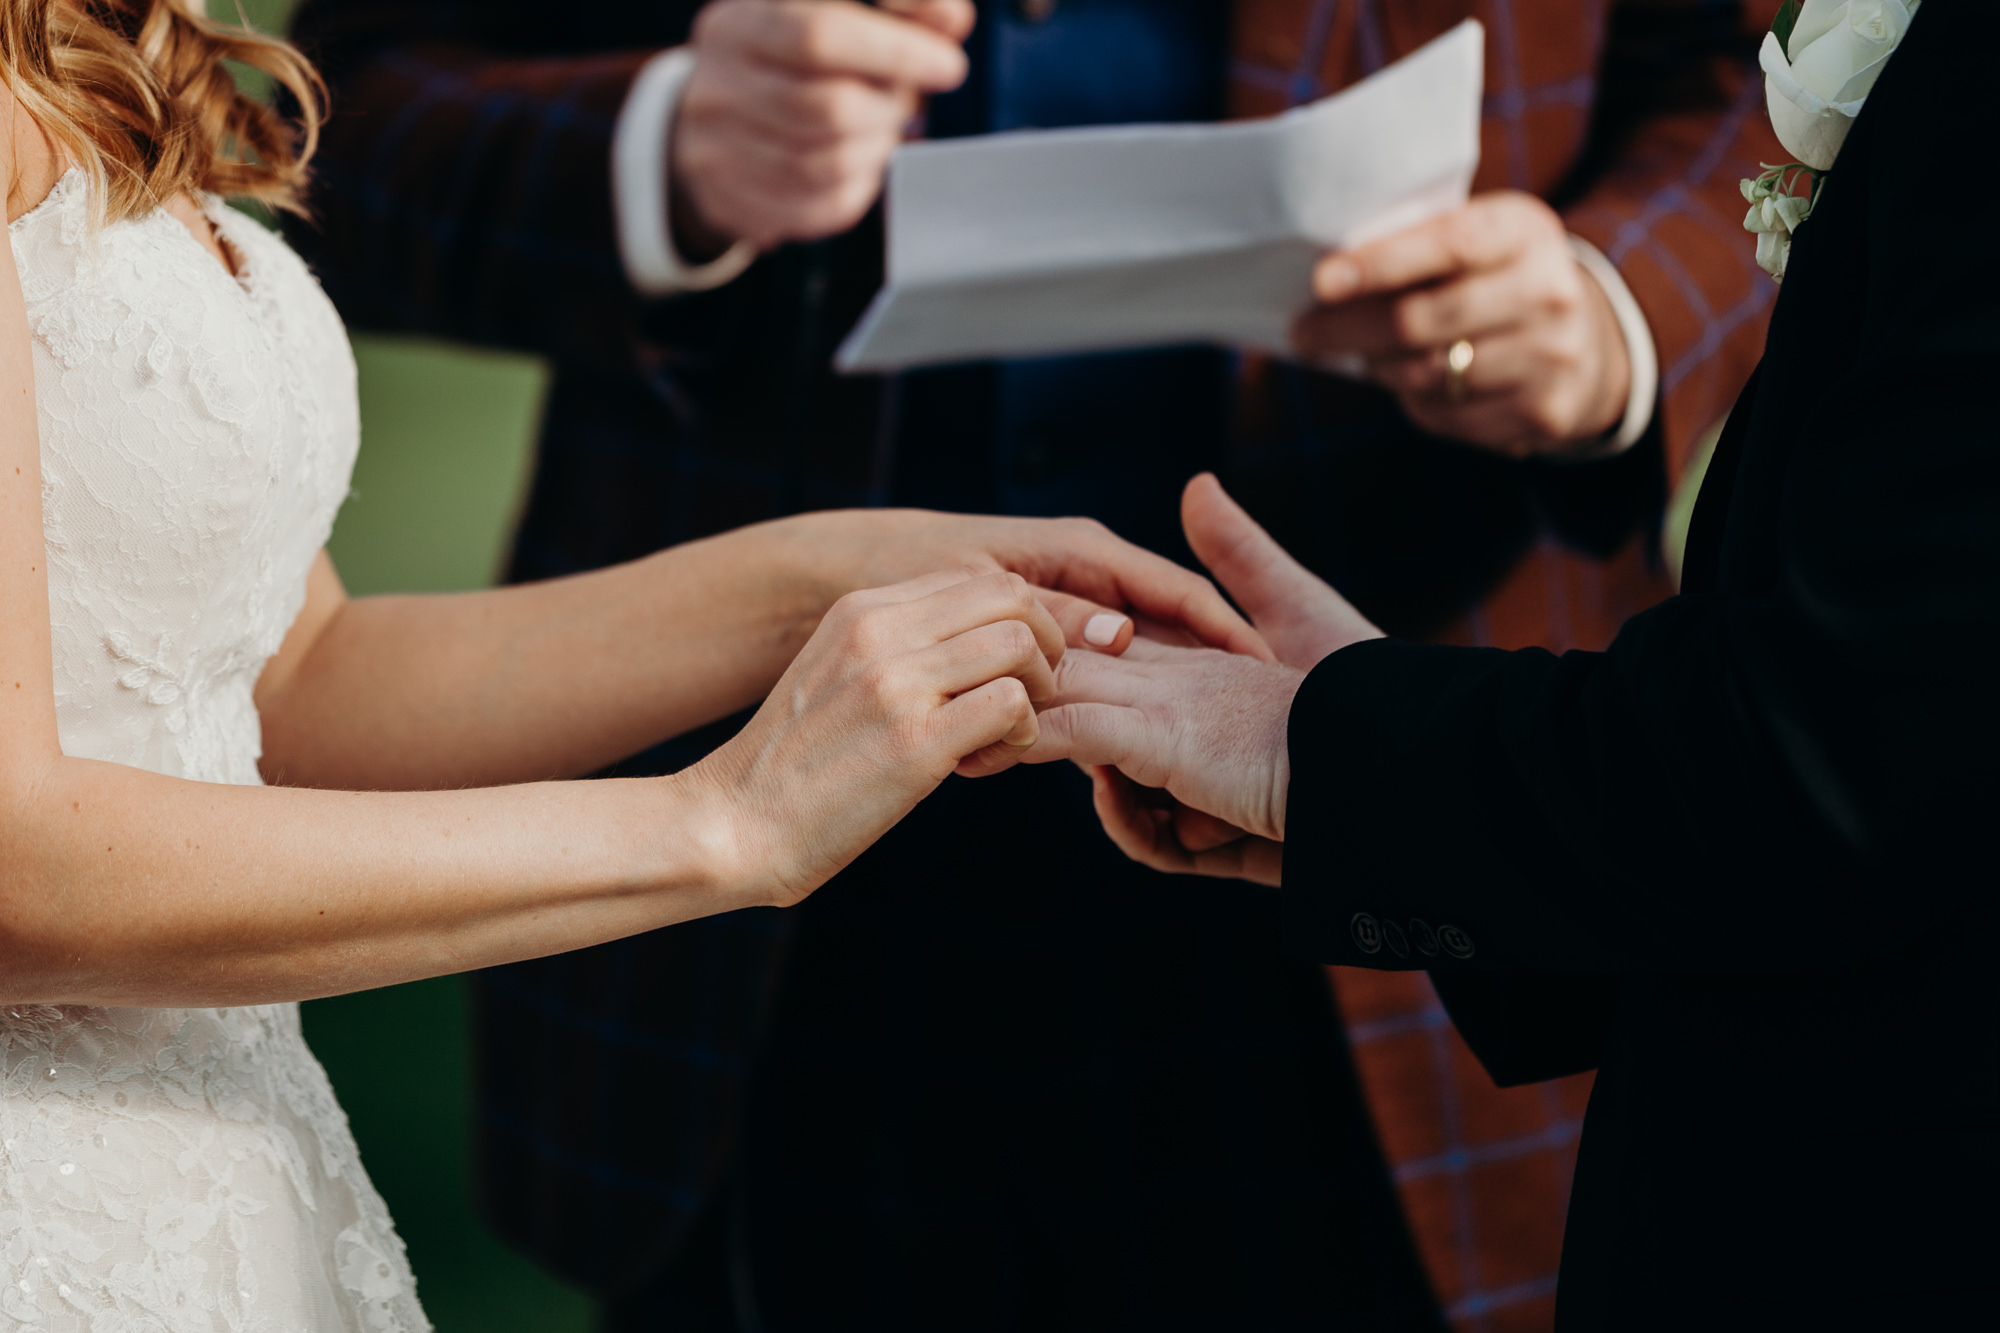 ring exchange during a wedding ceremony at the upper montclair country club in montclair, new jersey